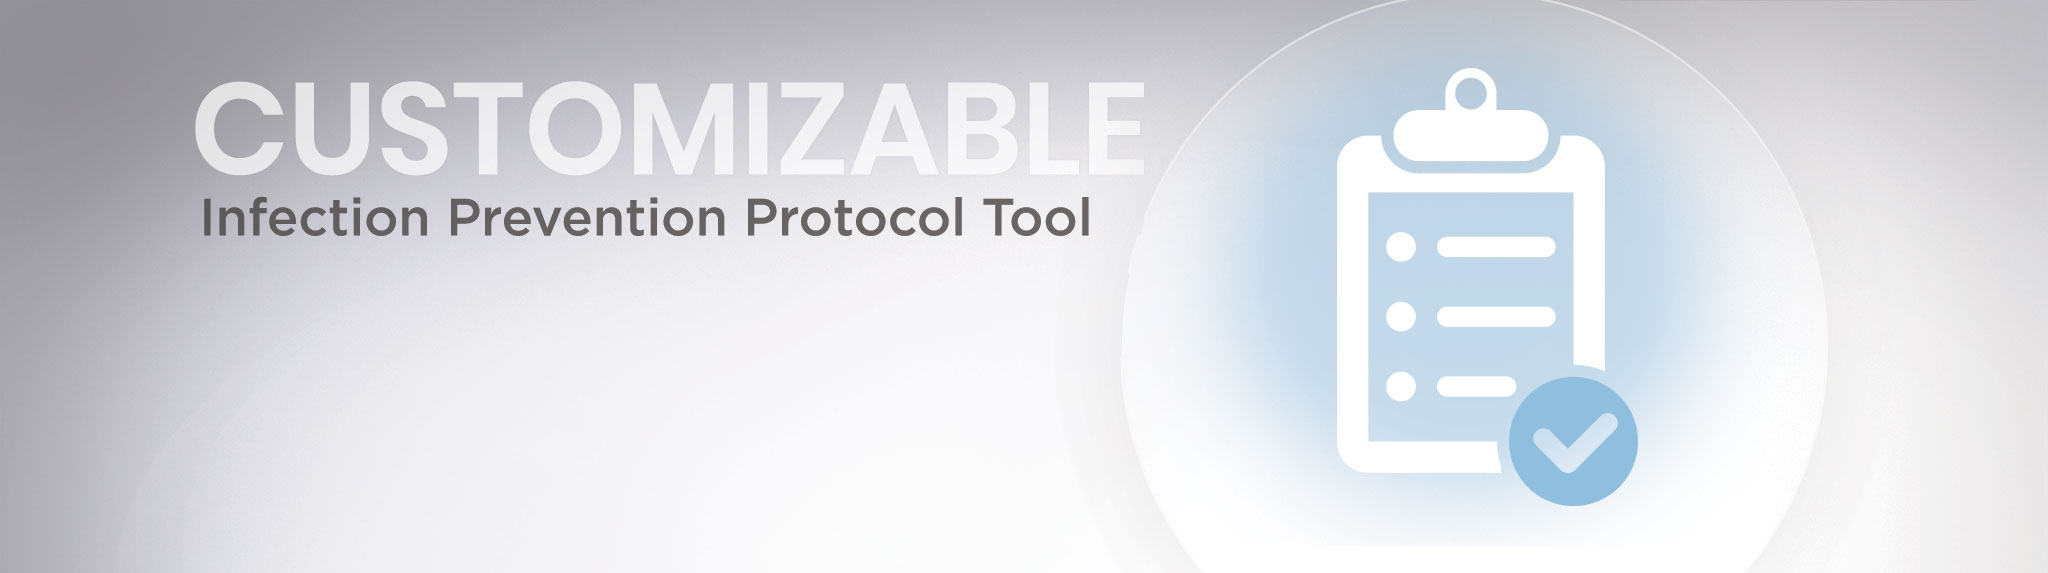 Customizable Infection Prevention Protocol Tool